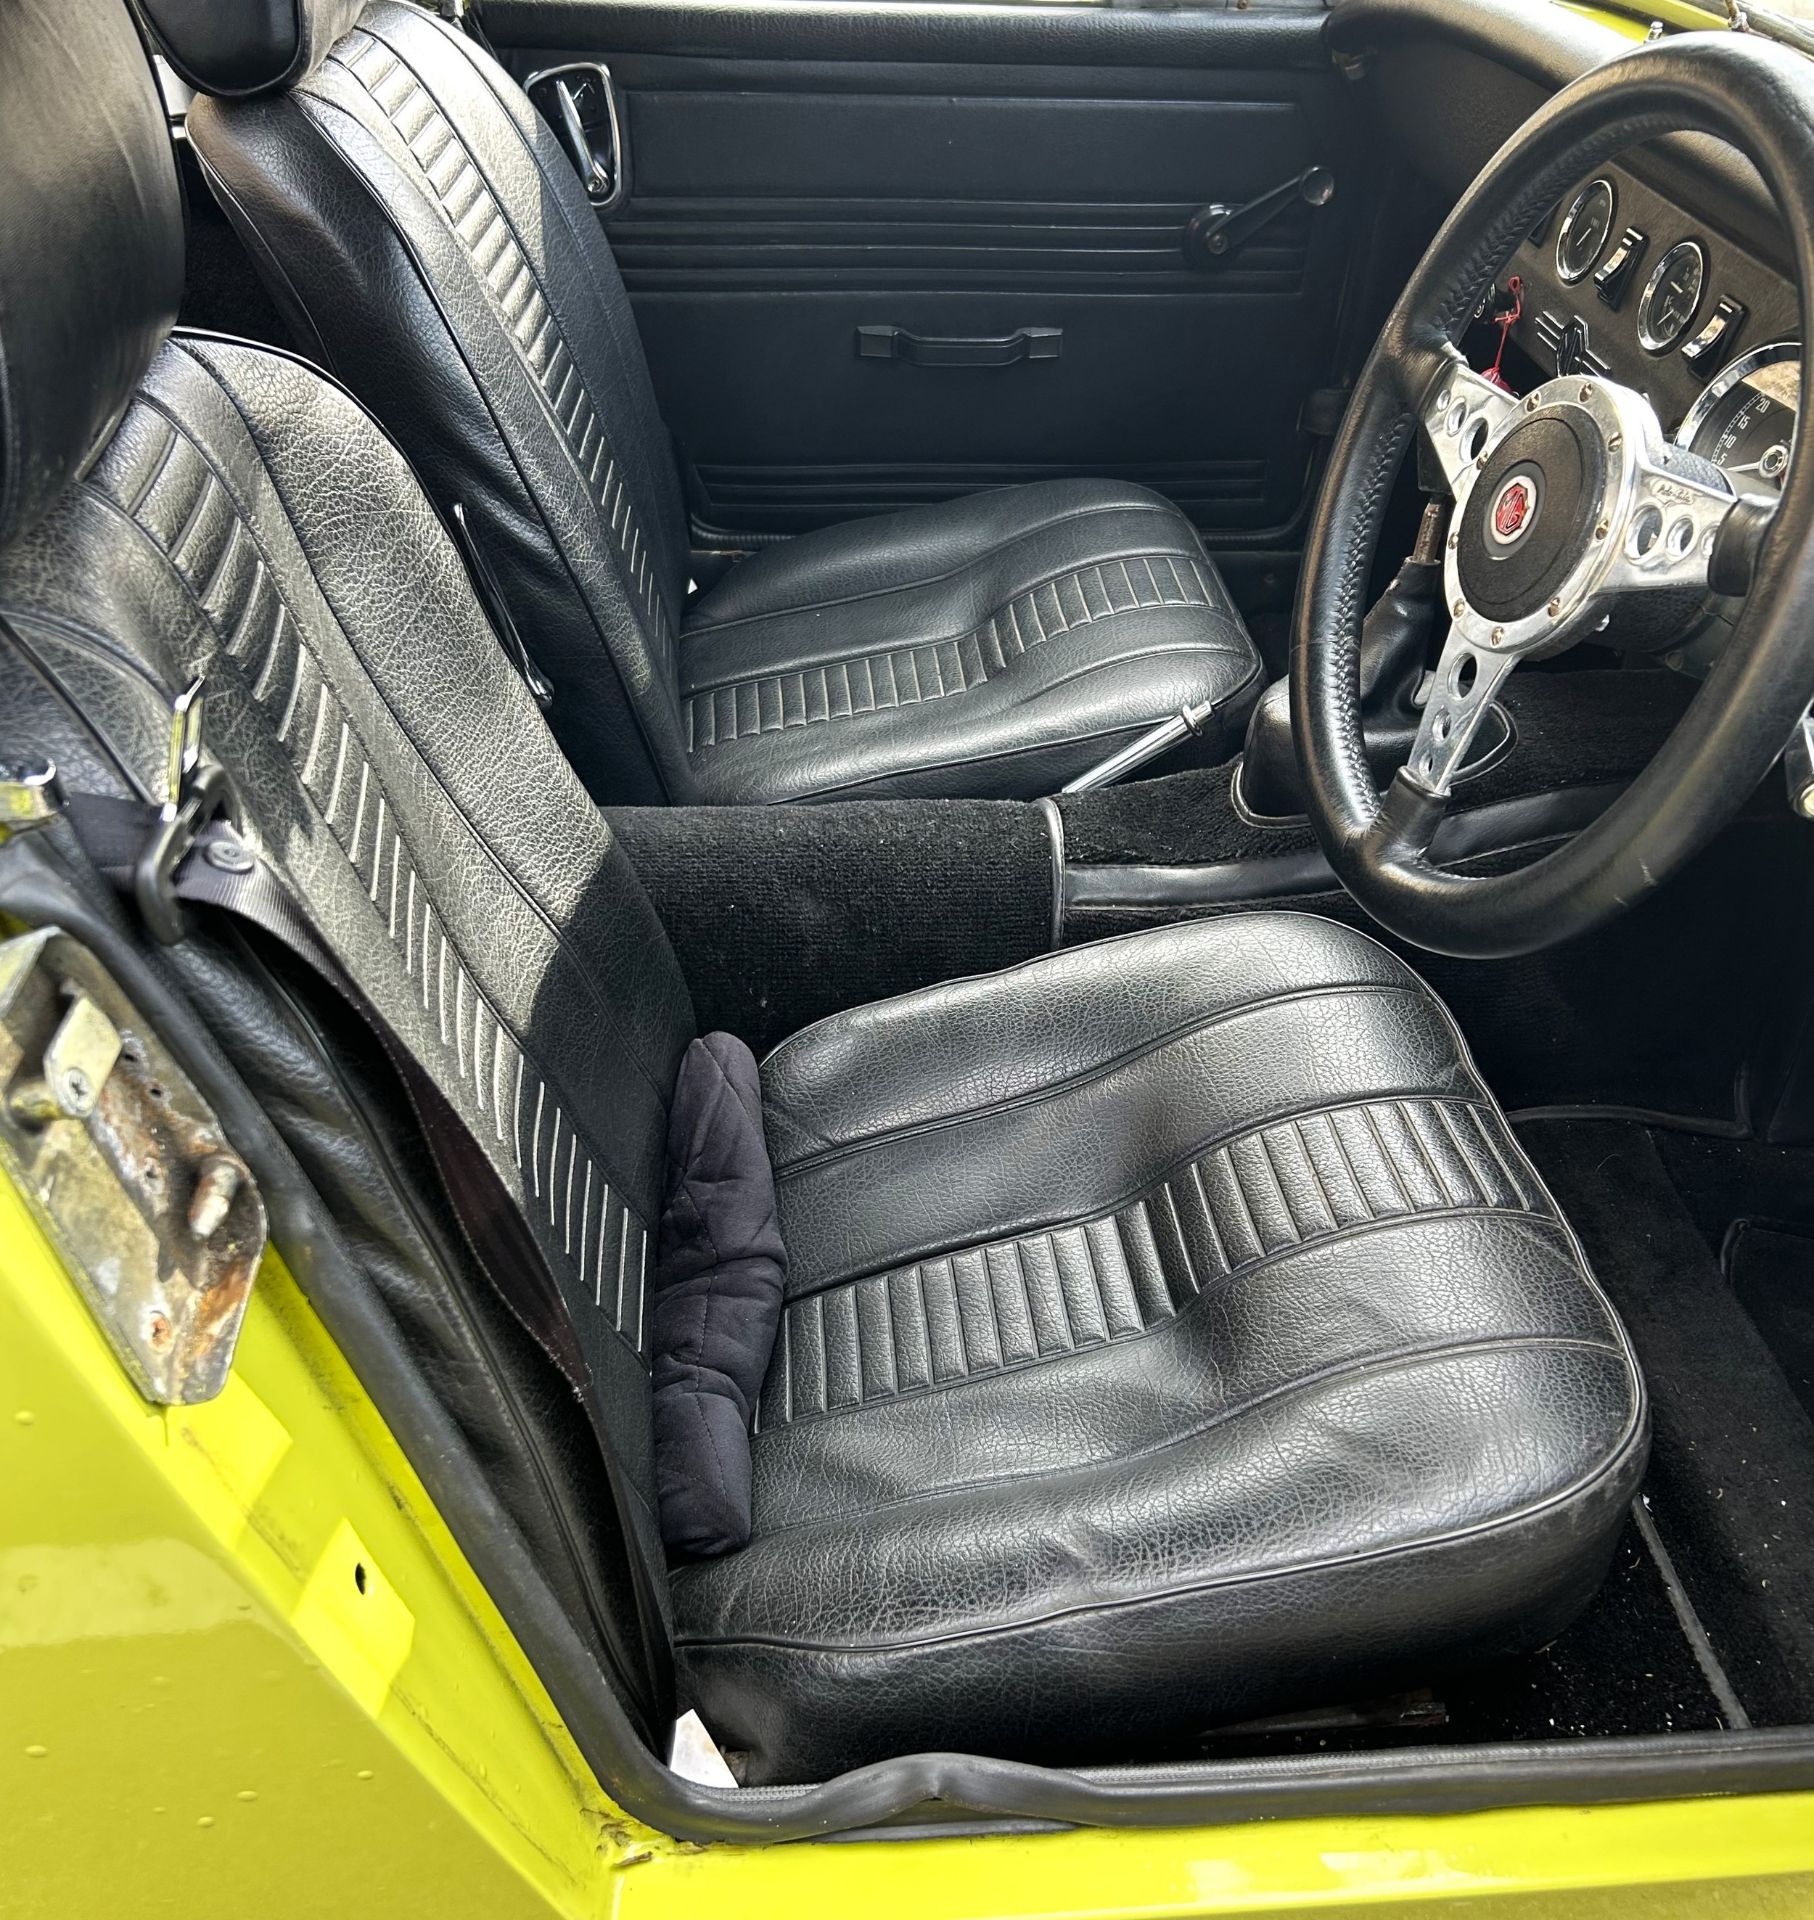 1974 MG MIDGET Registration Number: PVV 294N Chassis Number: G-AN5/147935-G Recorded Mileage: c.16, - Image 10 of 13